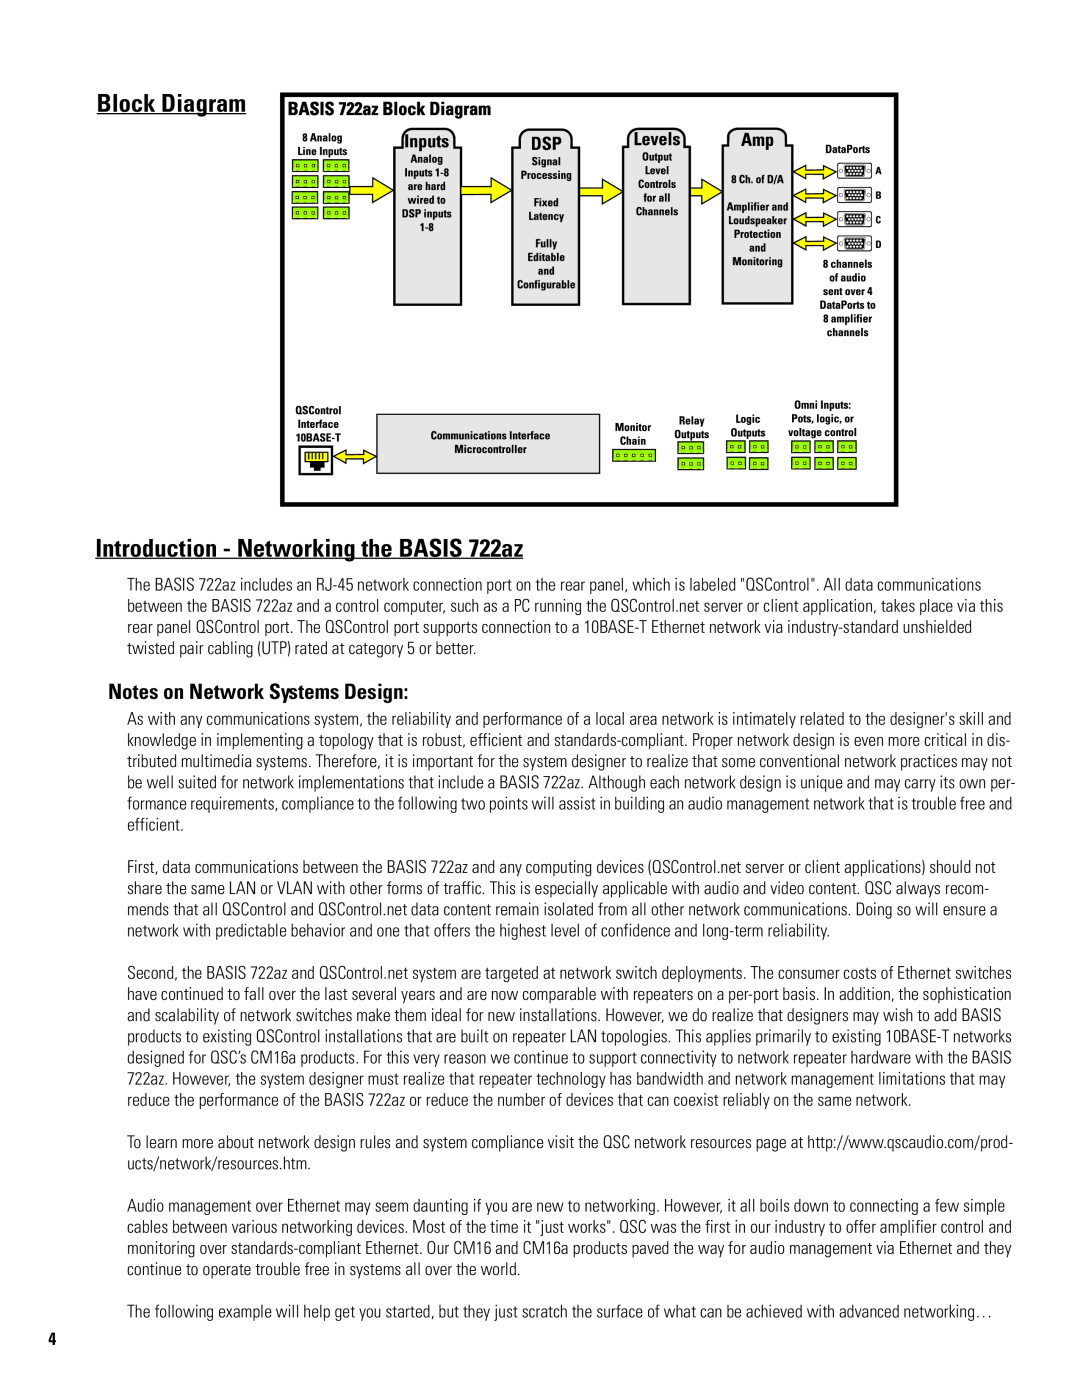 QSC Audio manual Block Diagram, Introduction - Networking the BASIS 722az, Notes on Network Systems Design 